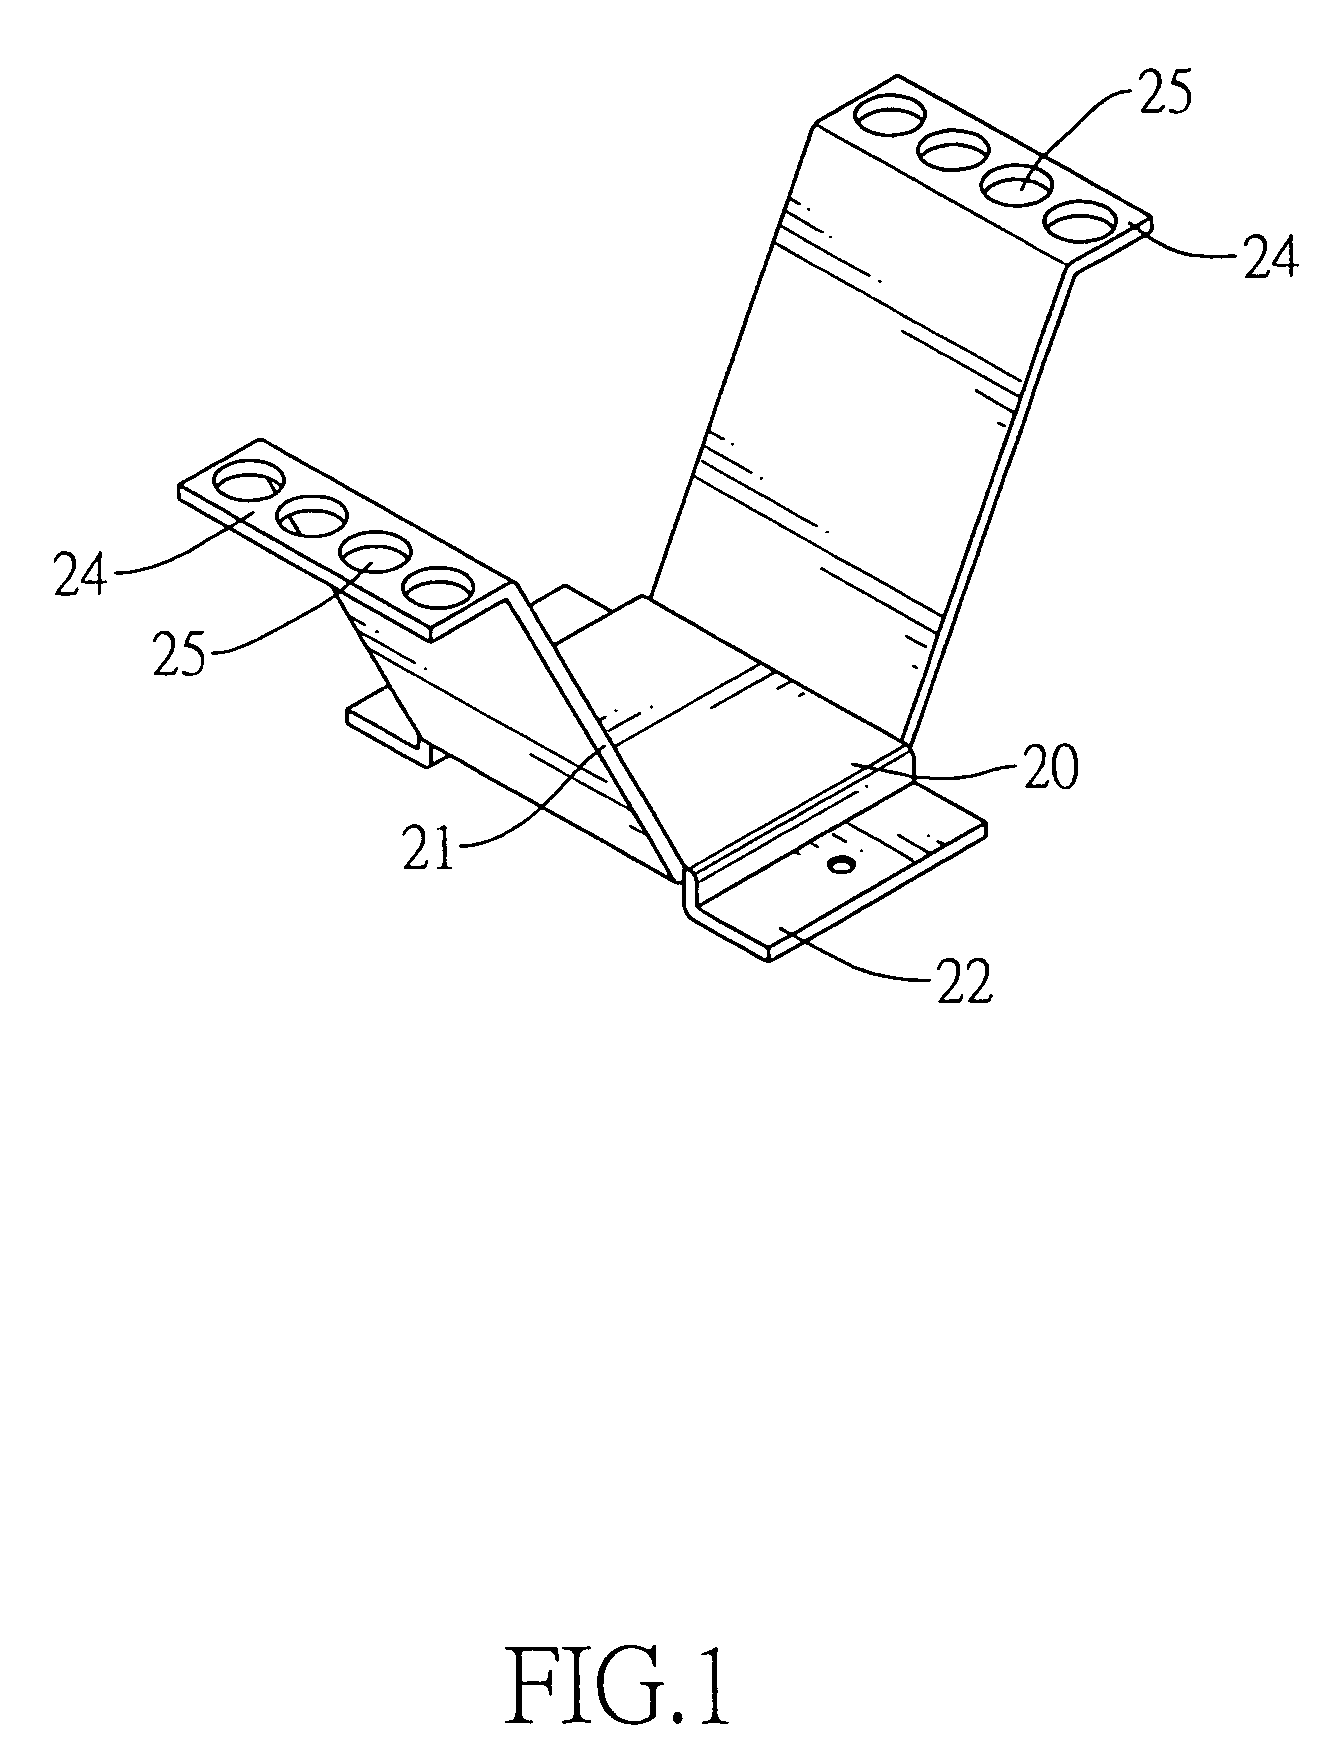 Supporting seat for supporting weight of heat dissipating fins to avoid deformation of heat dissipating tubes extending through the heat dissipating fins